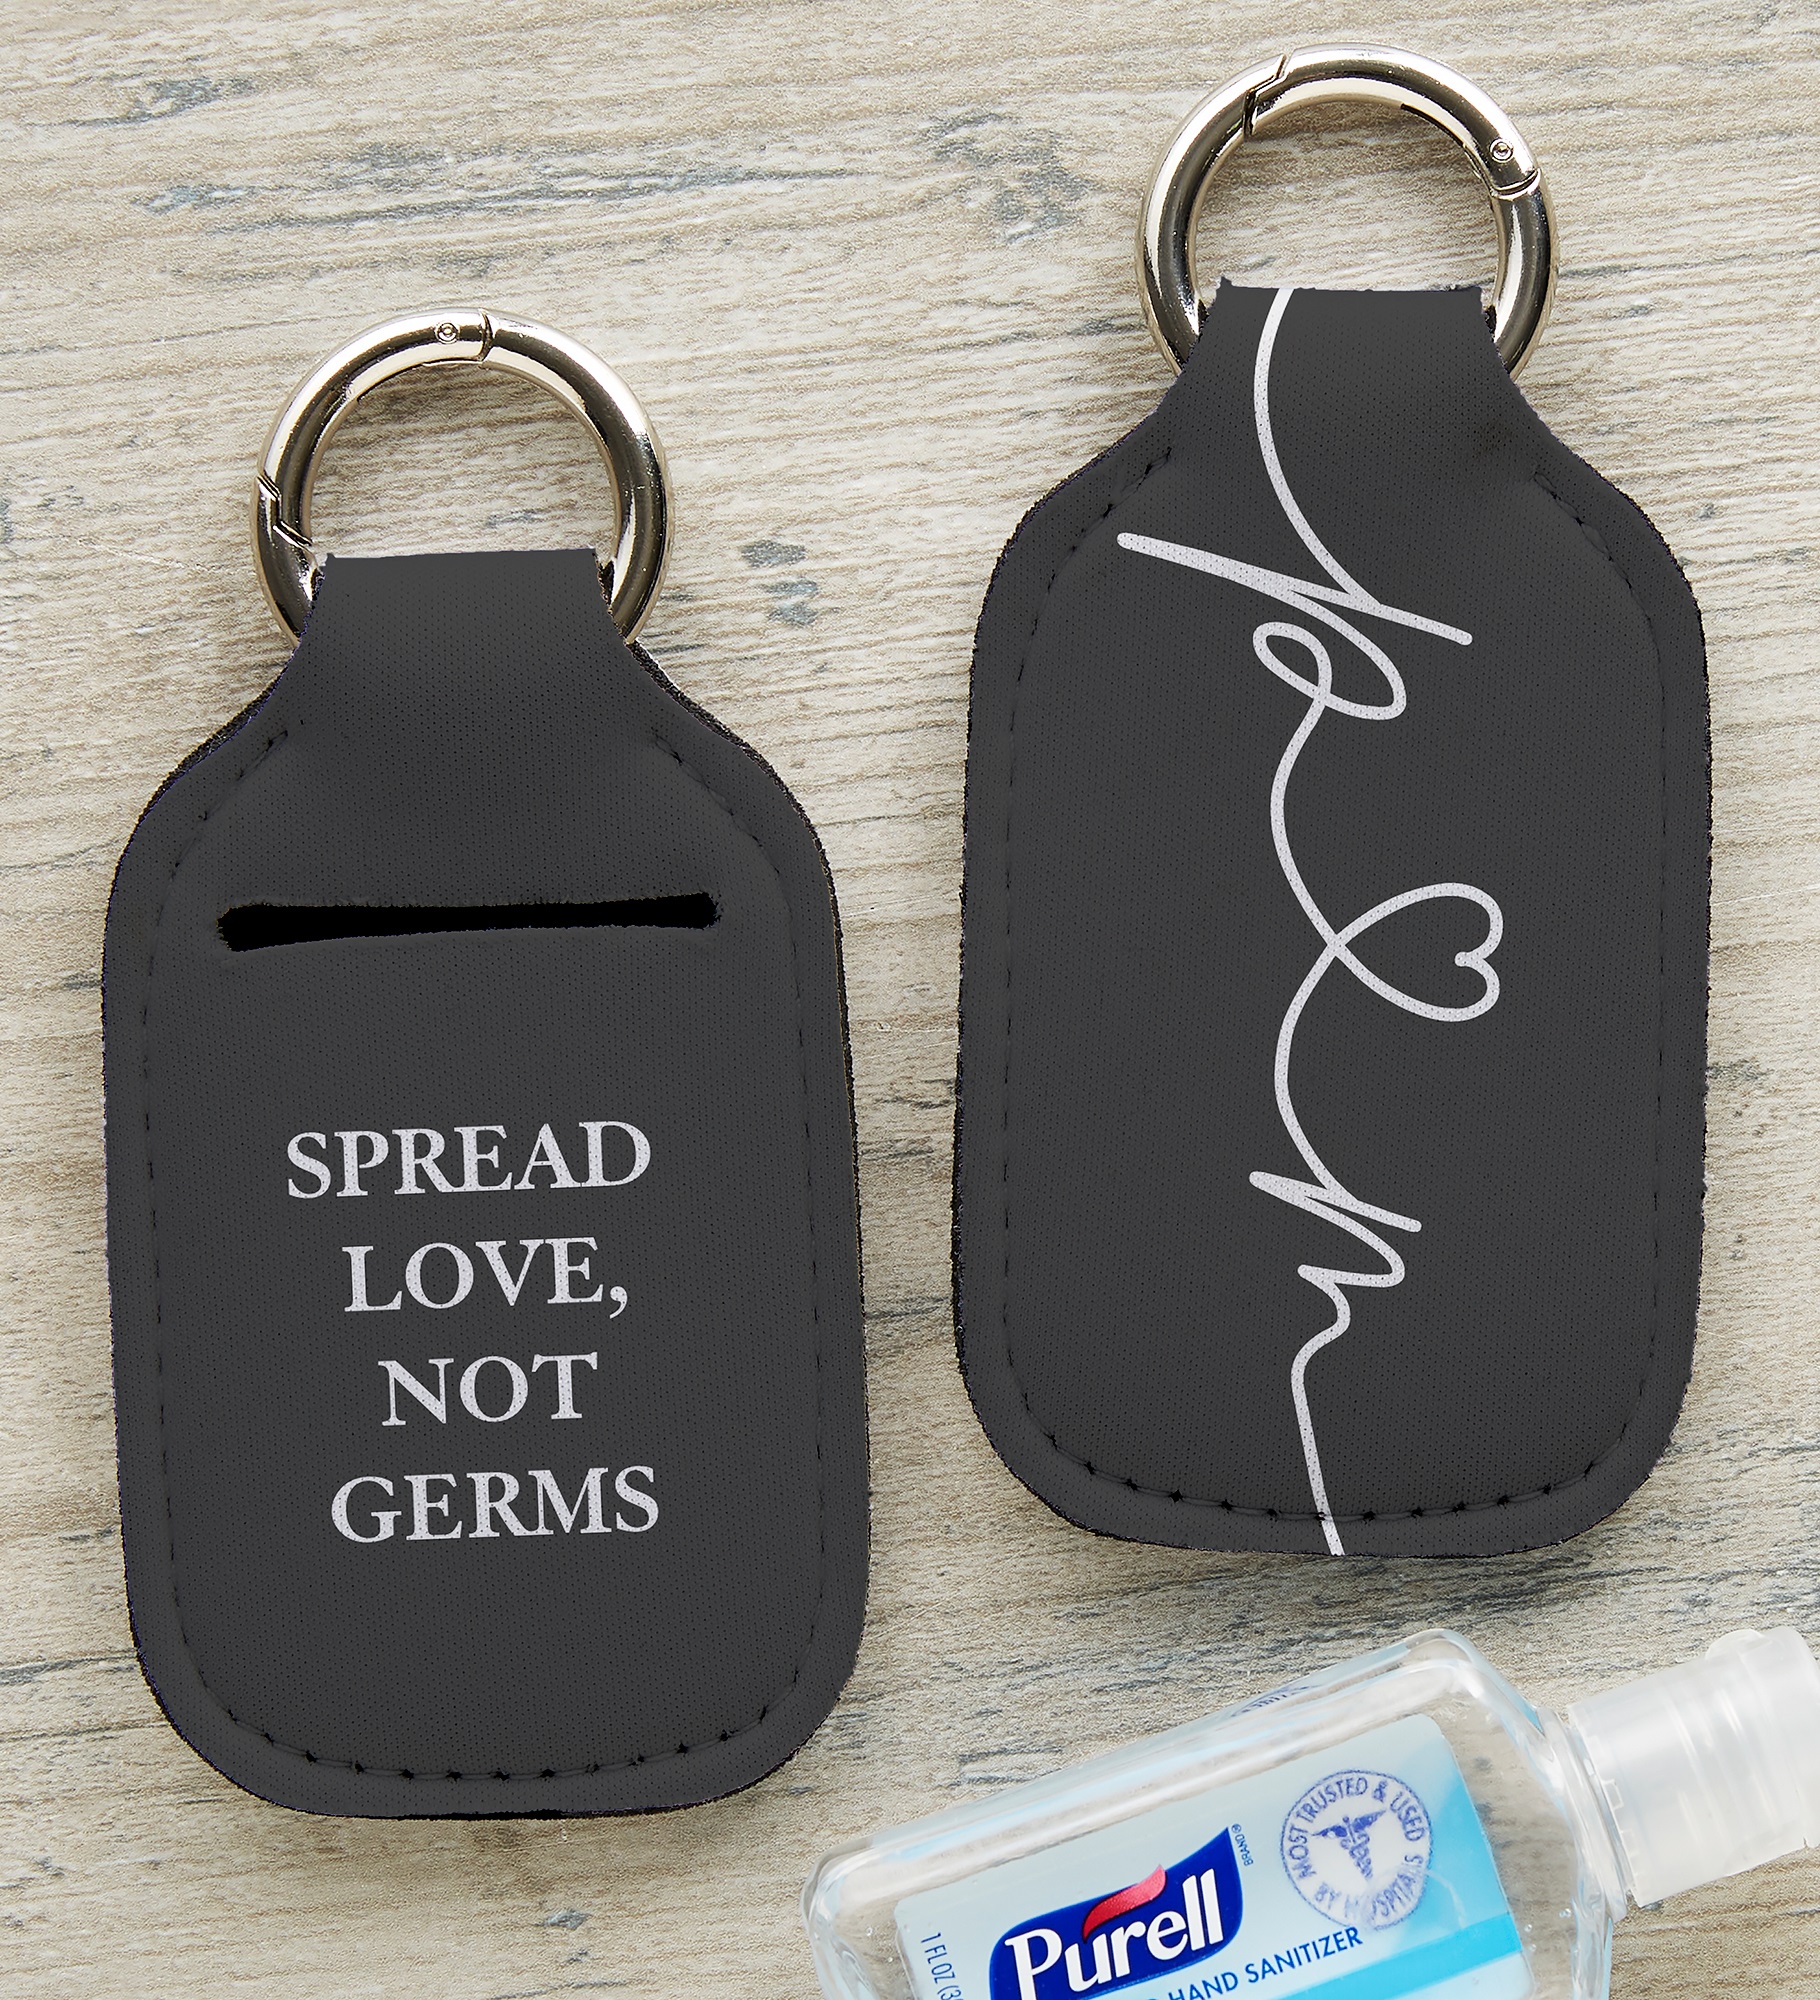 Drawn Together By Love Personalized Hand Sanitizer Holder Keychain